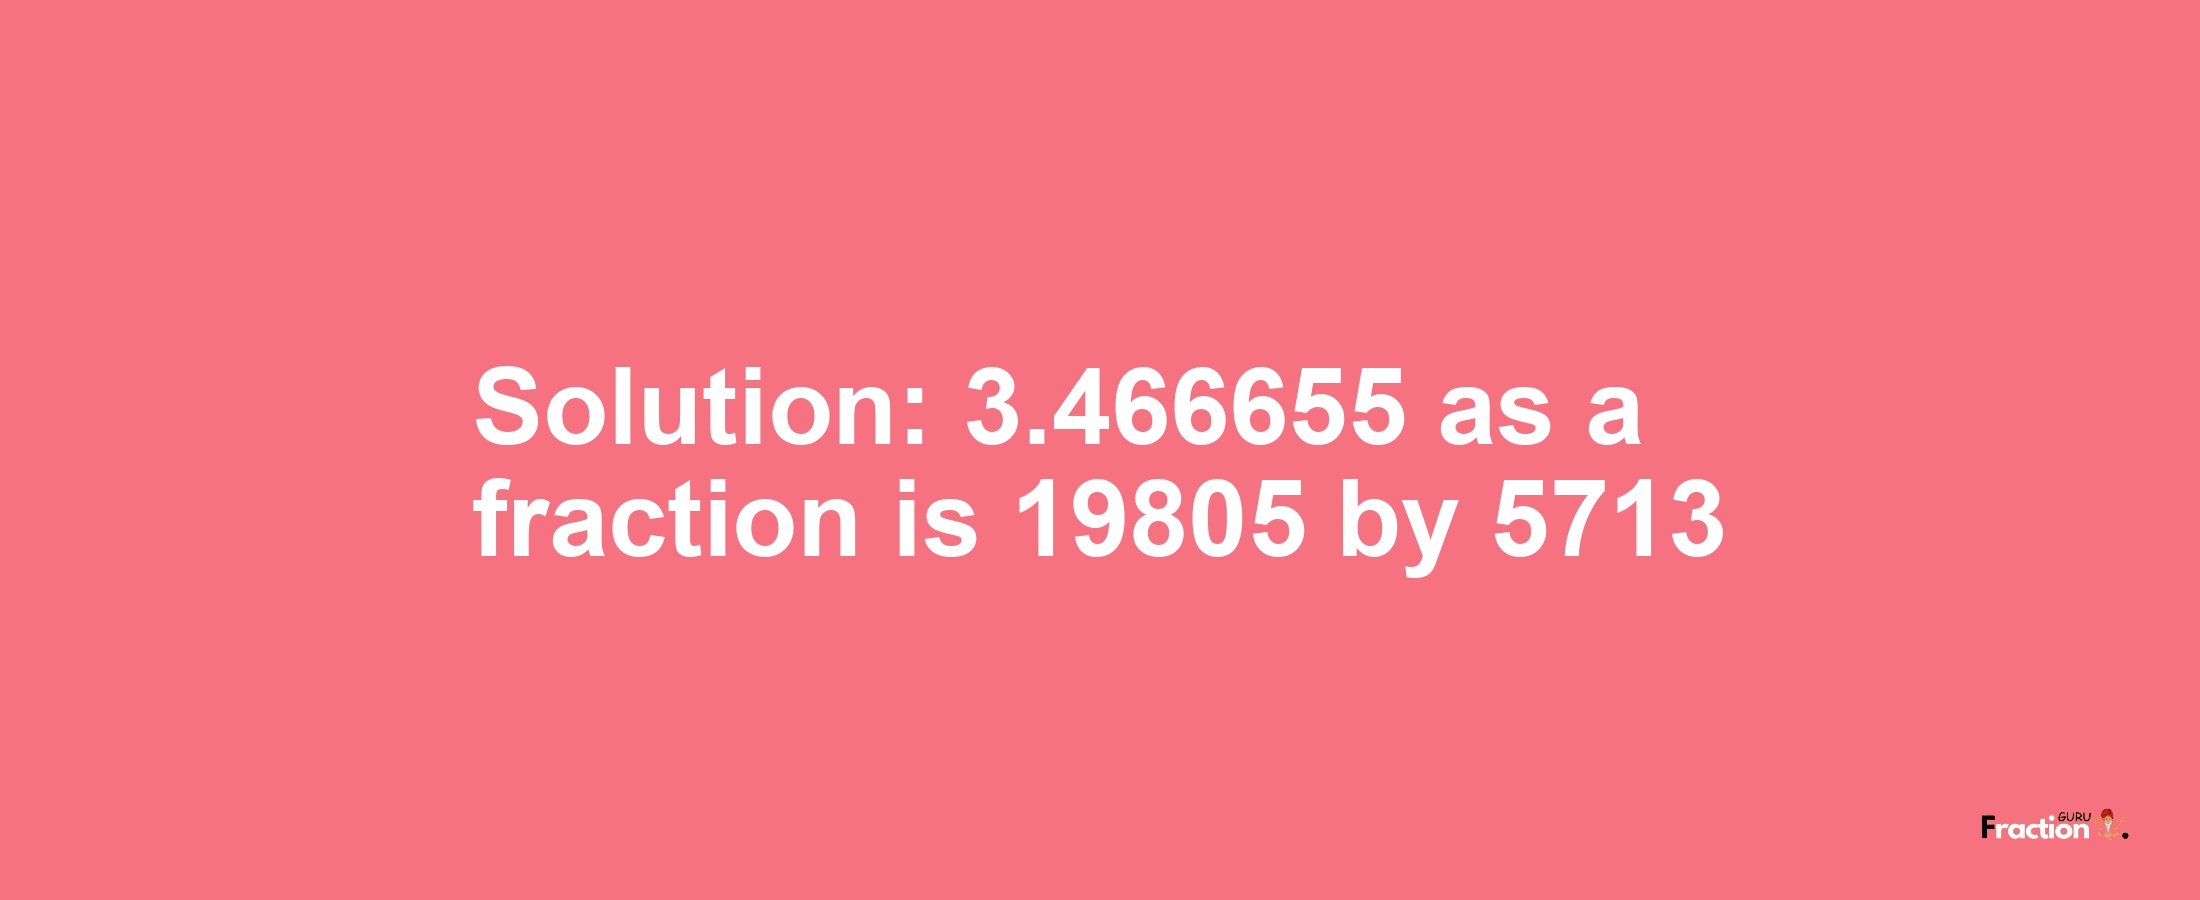 Solution:3.466655 as a fraction is 19805/5713